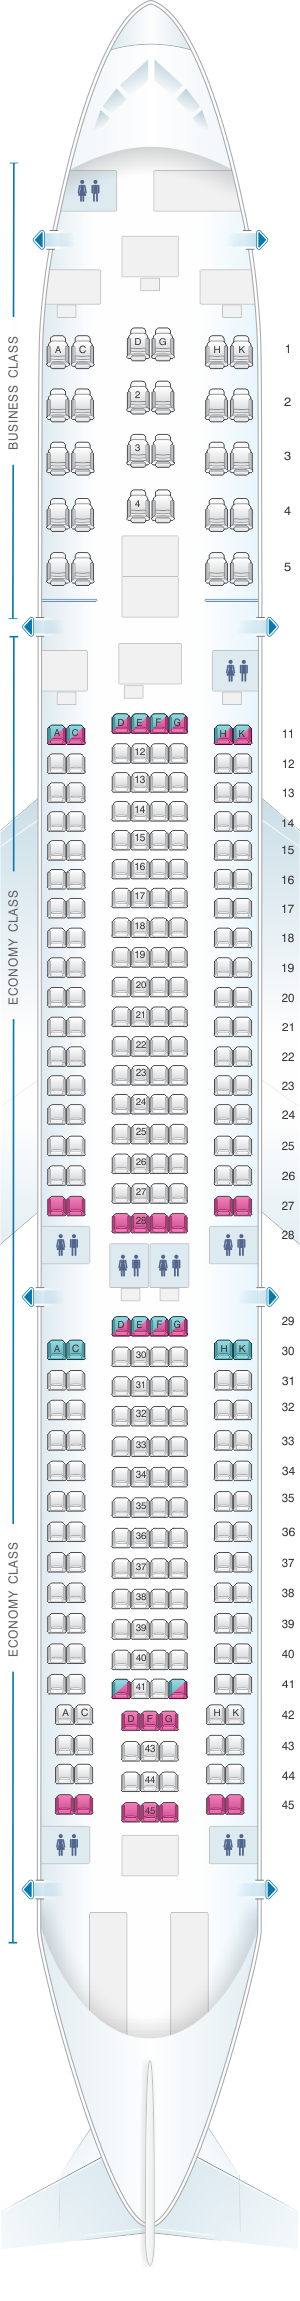 Seat map for Aeroflot Russian Airlines Airbus A330 300 Config.2